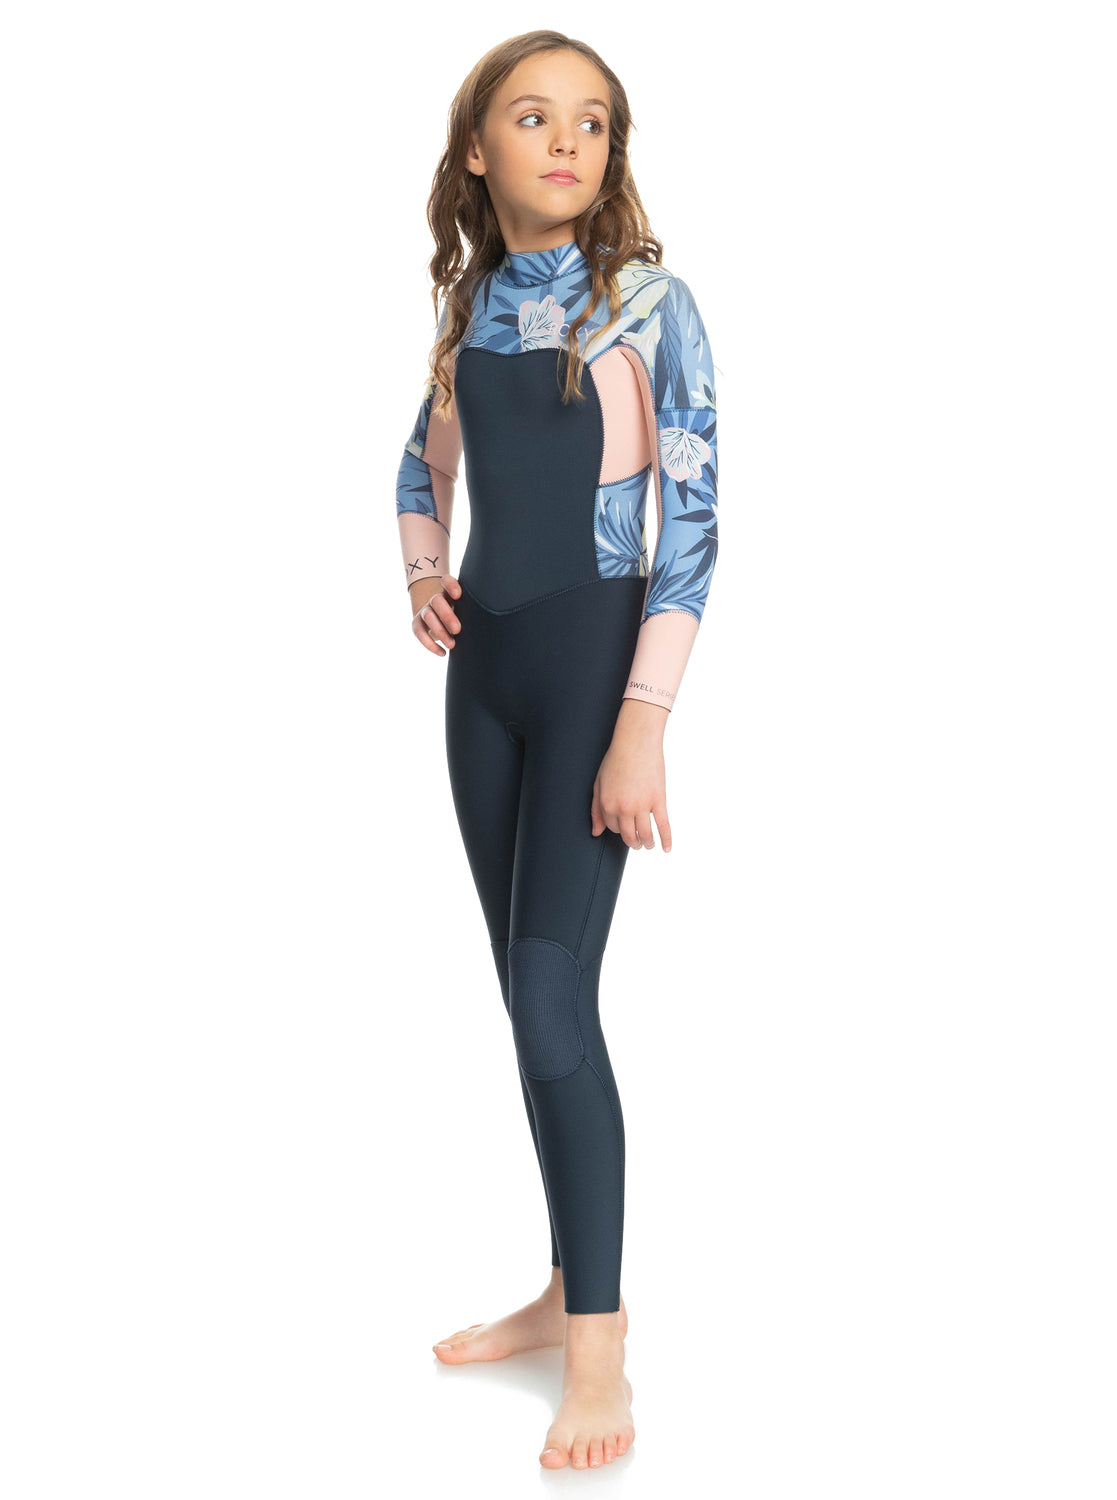 Girls 8-16 4/3mmswell Series Back Zip Wetsuit - Allure Rg Fasso S – Roxy.com